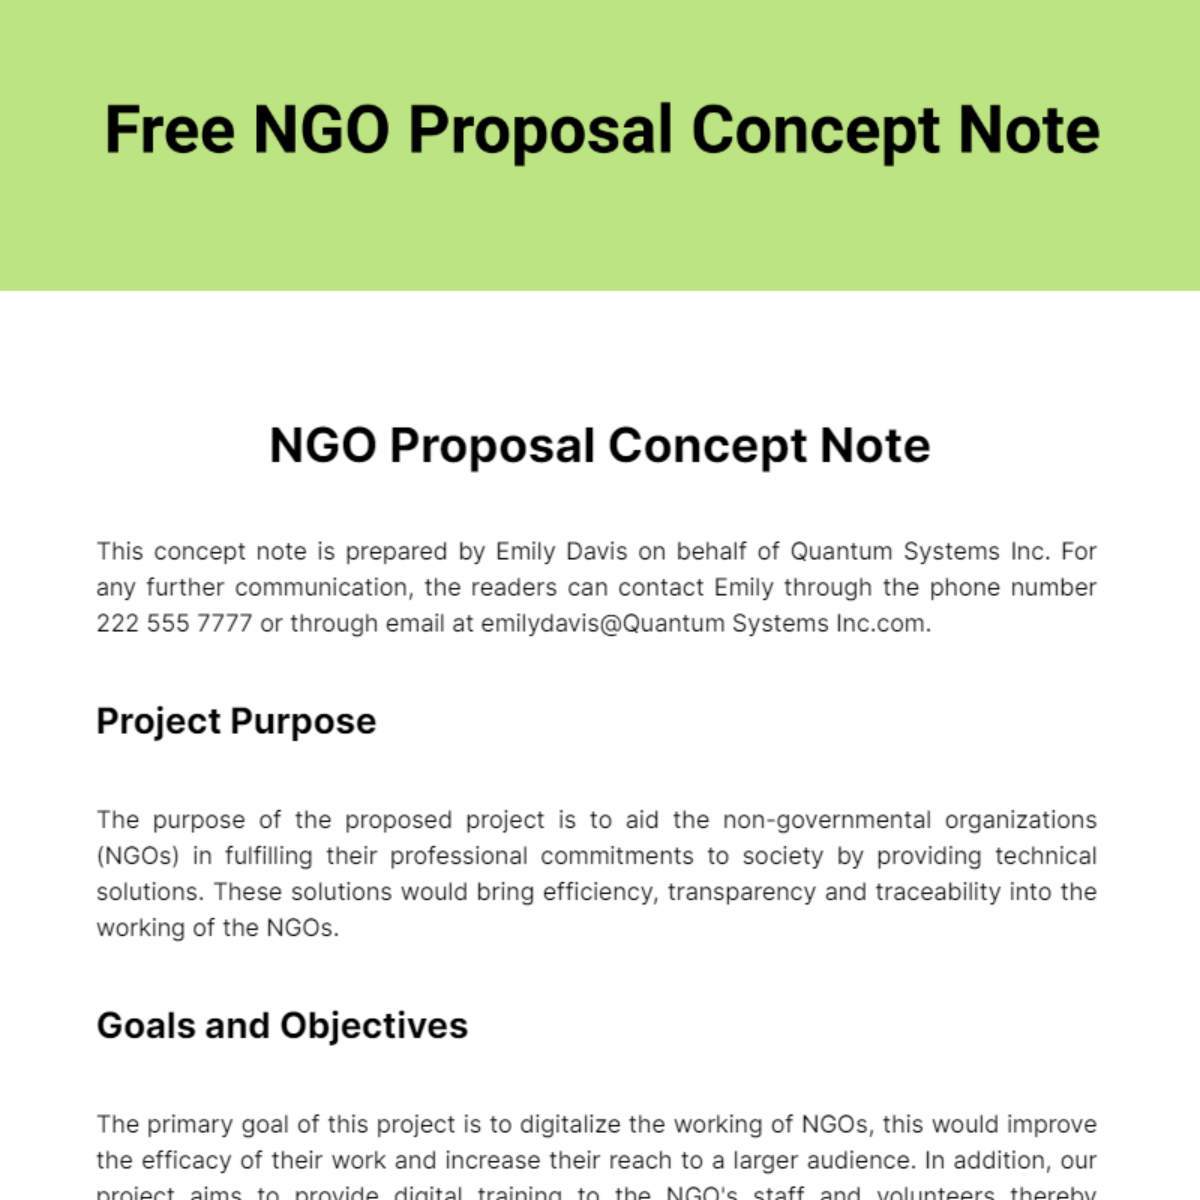 Free NGO Proposal Concept Note Template